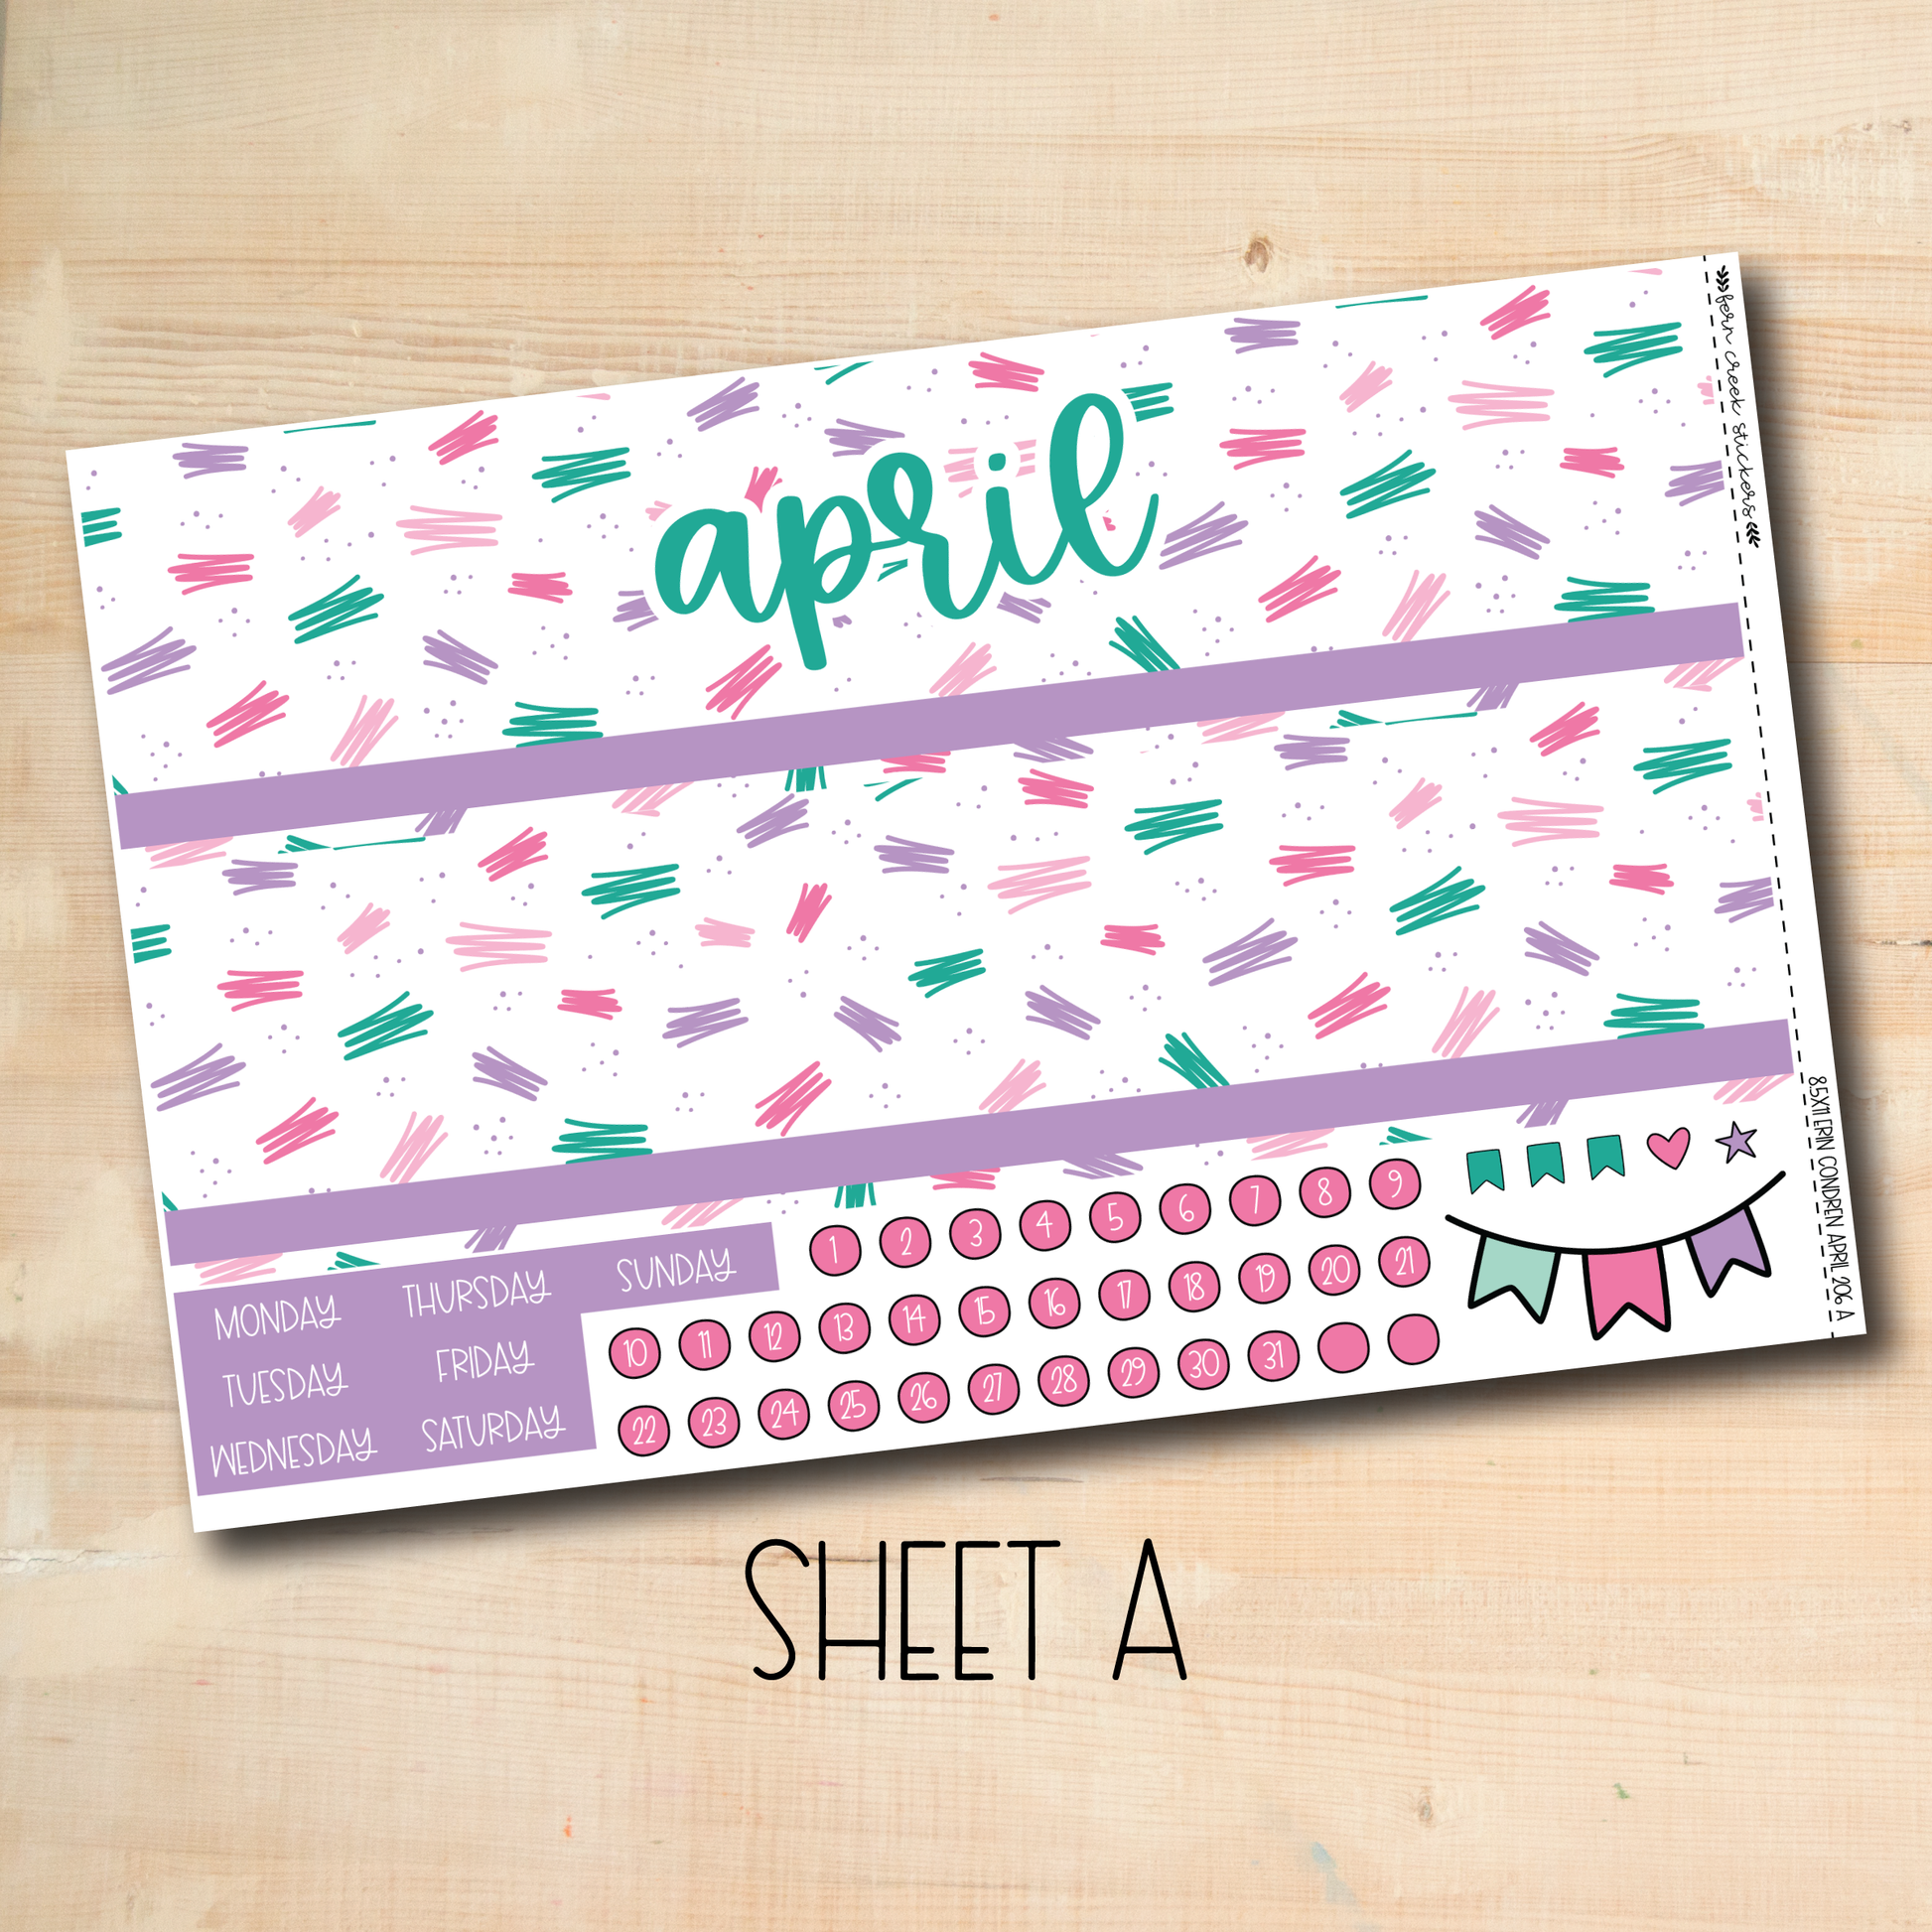 a sheet of paper with the word april written on it